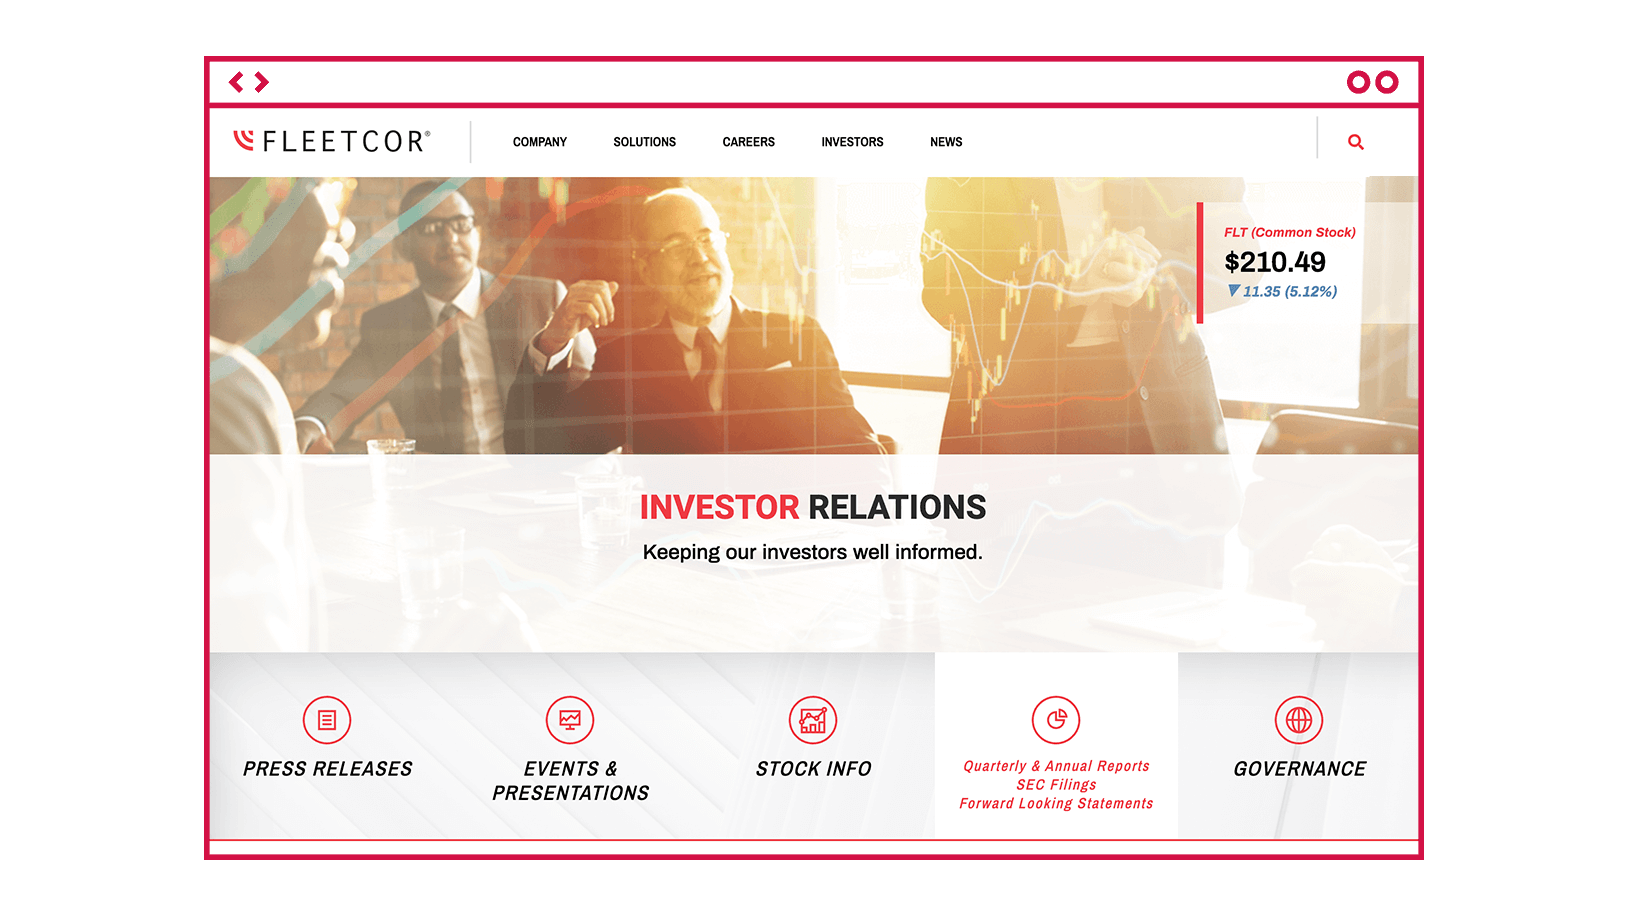 Fleetcor site Investor Relations page design in browser